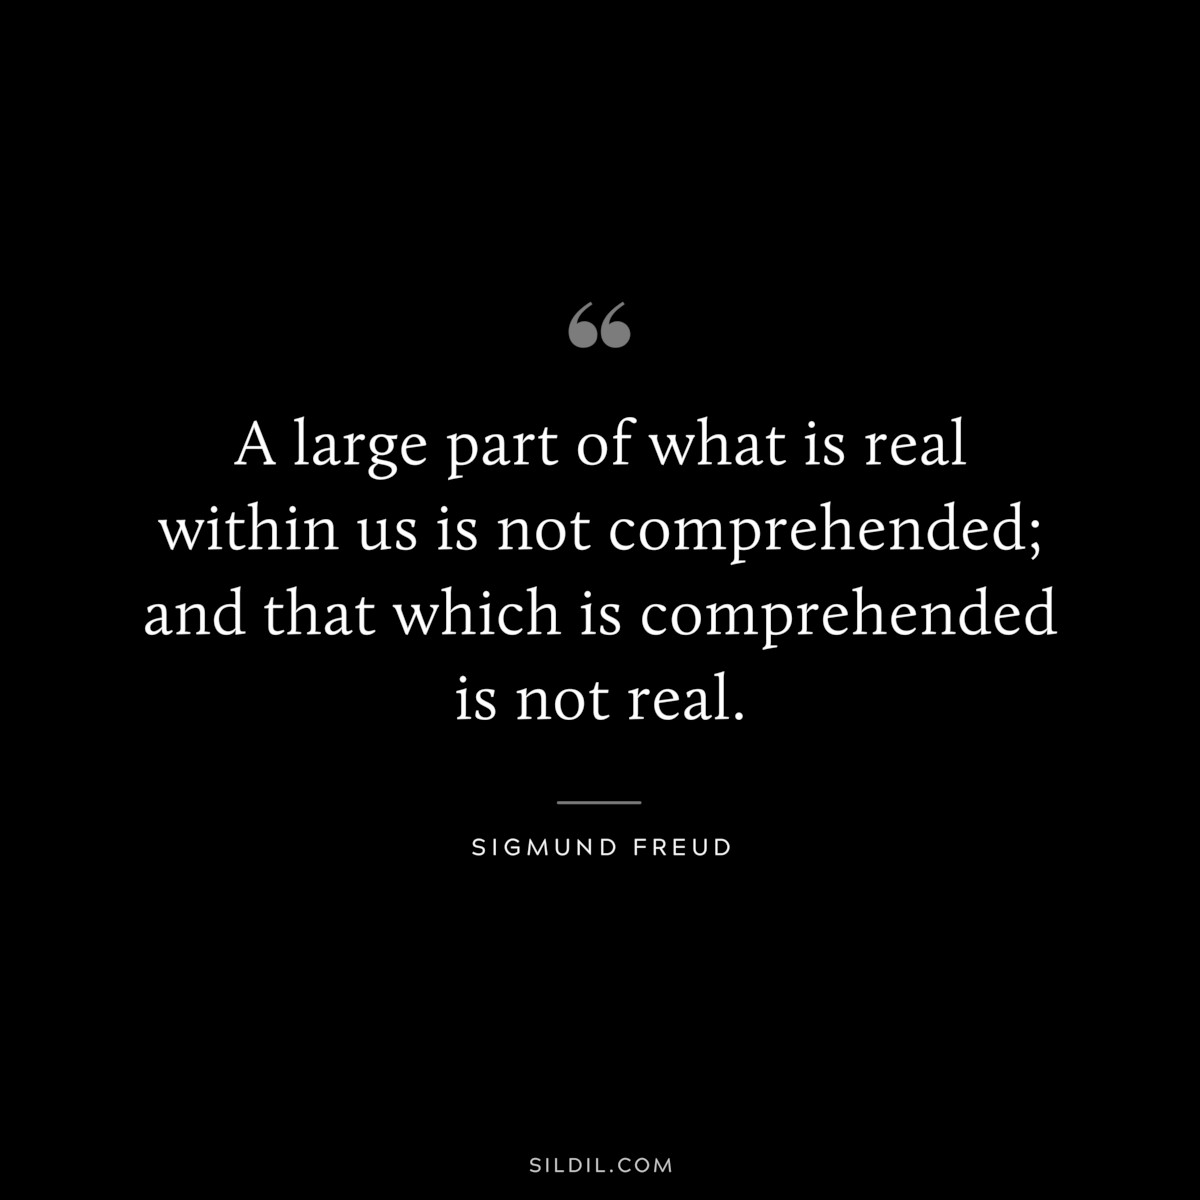 A large part of what is real within us is not comprehended; and that which is comprehended is not real. ― Sigmund Frued